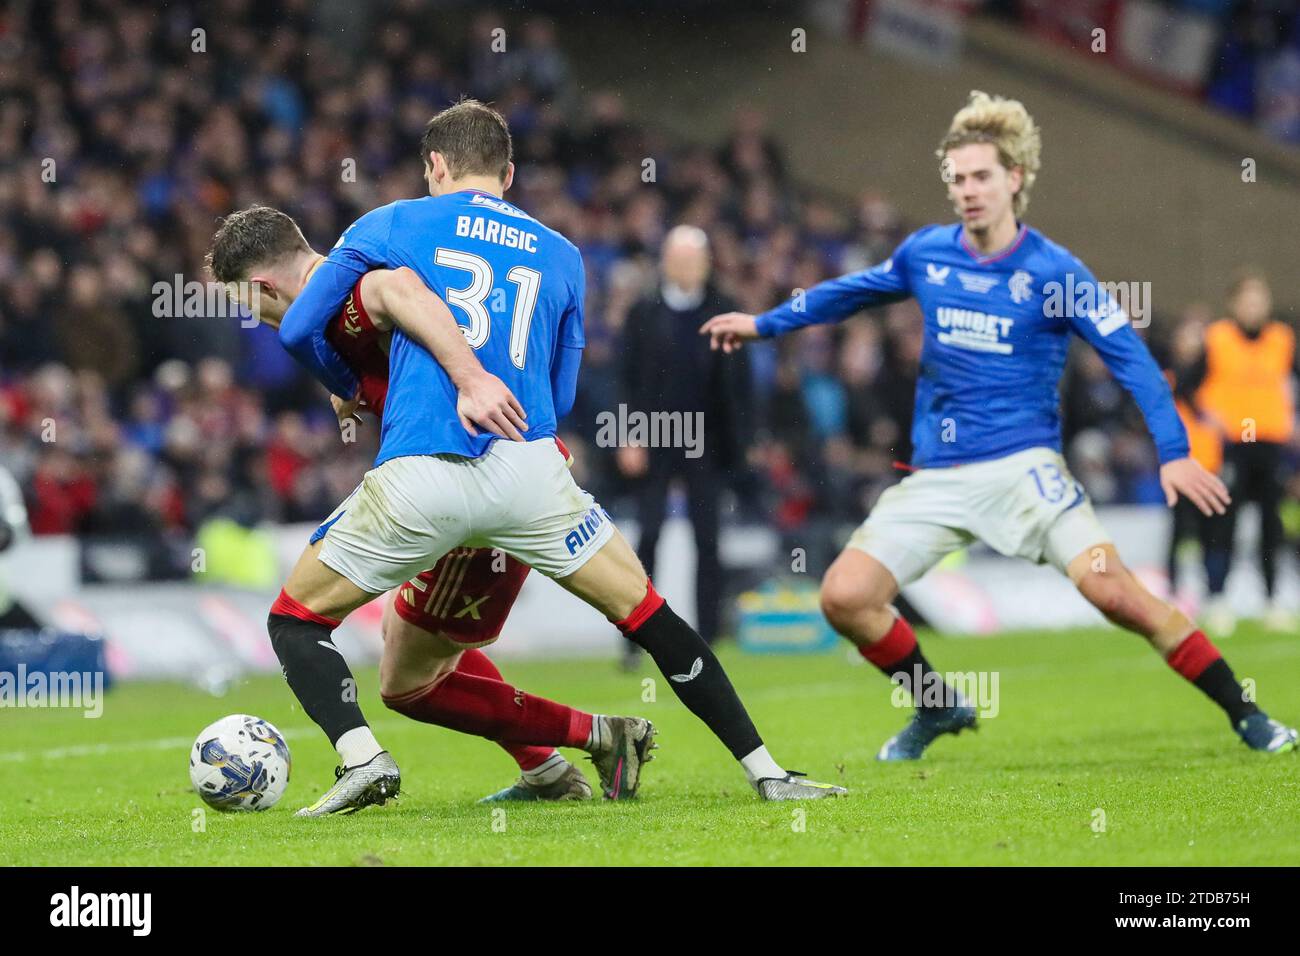 Glasgow, UK. 17th Dec, 2023. In the final of the 2023/2024 Viaplay Cup football competition, Rangers played Aberdeen at Hampden Park, the Scottish FA National Stadium. Rangers won 1 - 0, with the winning goal being scored by James Tavernier, (Rangers 2) the Rangers Captain, with an assist by Borna Barisic, (Rangers 31) in 78 minutes. Credit: Findlay/Alamy Live News Stock Photo